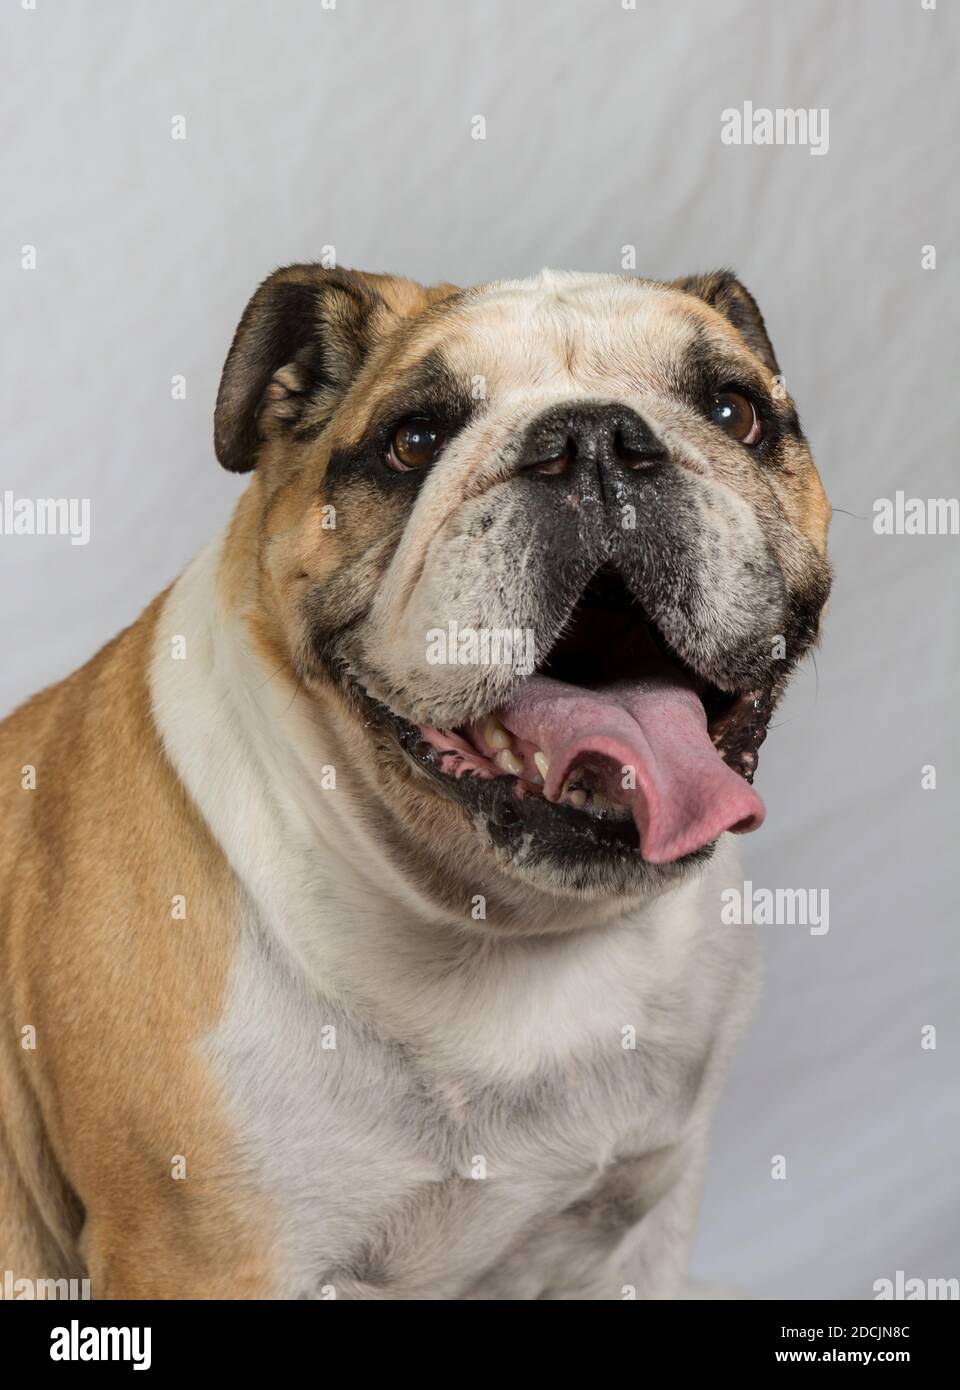 English Bulldog, tongue out, smiling at the camera, on a white high key background Vertical Stock Photo